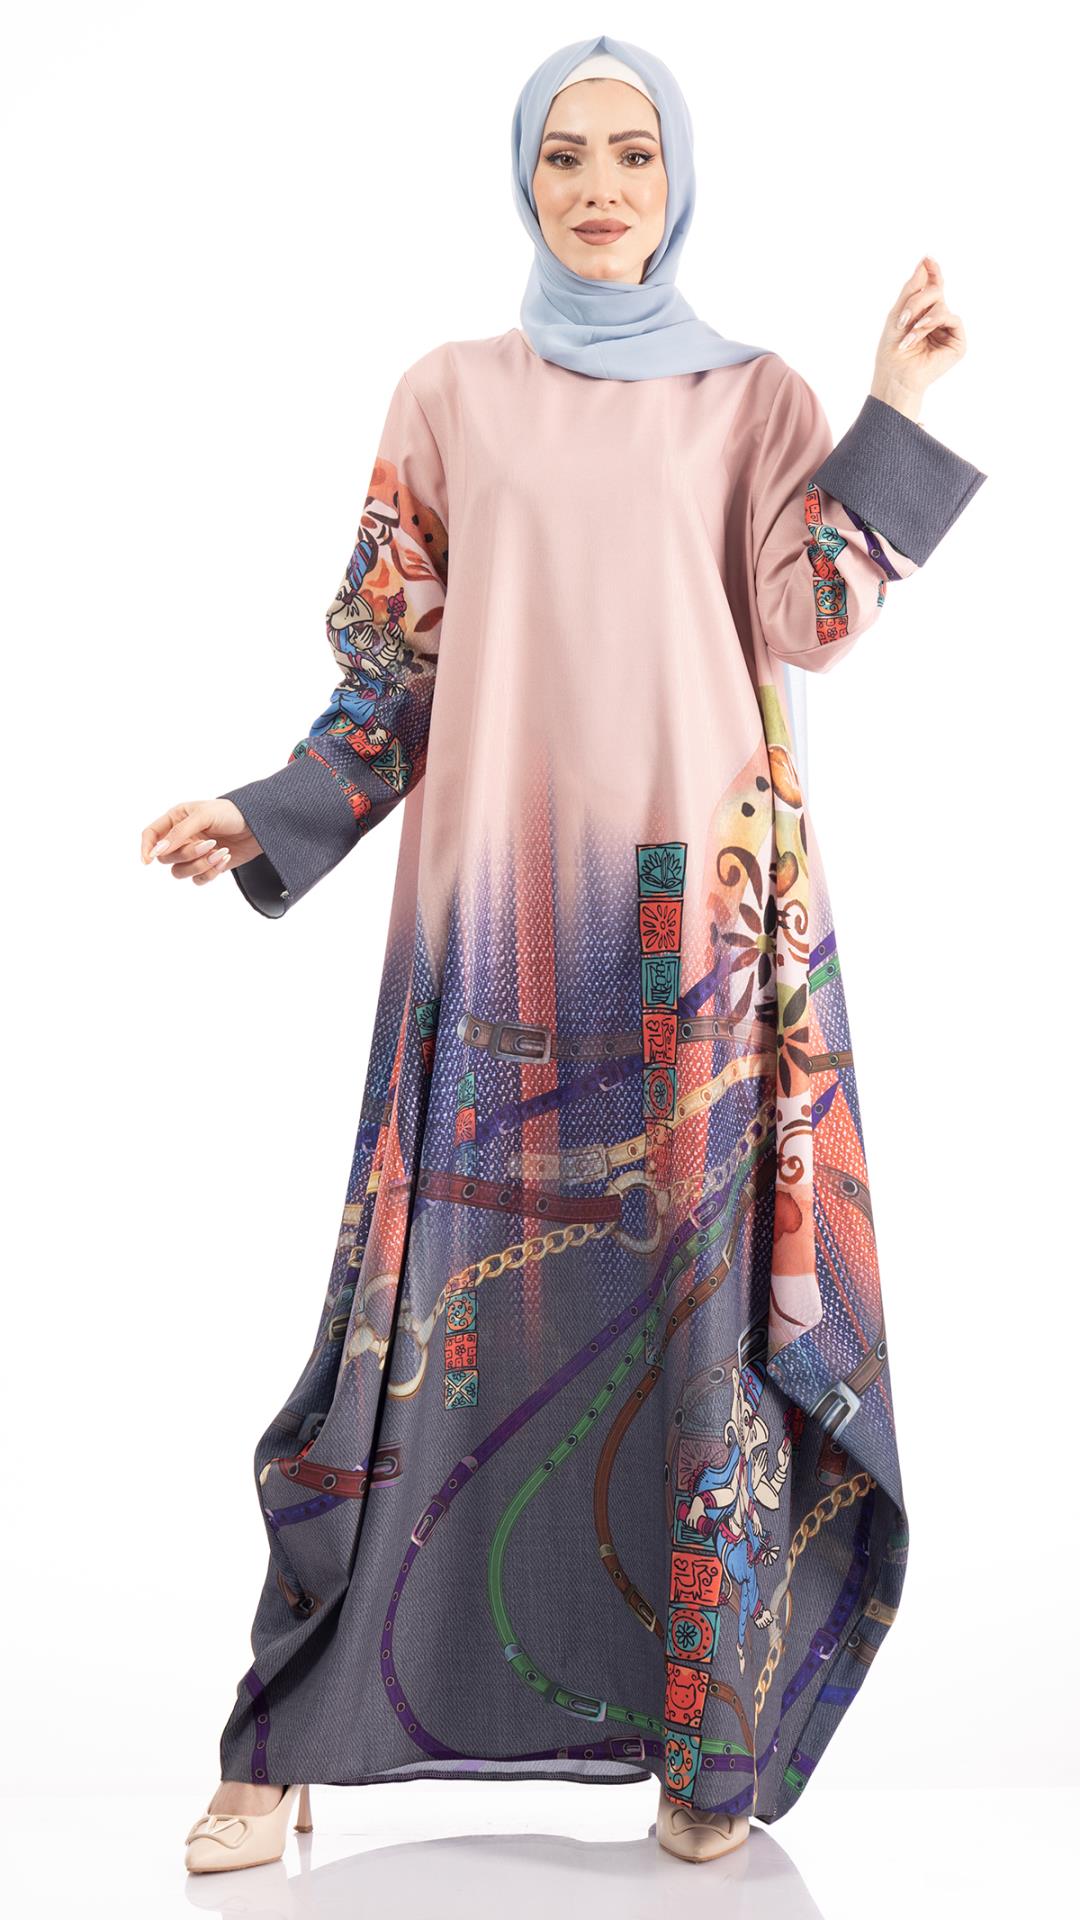 Plain abaya from the top and decorated from the bottom